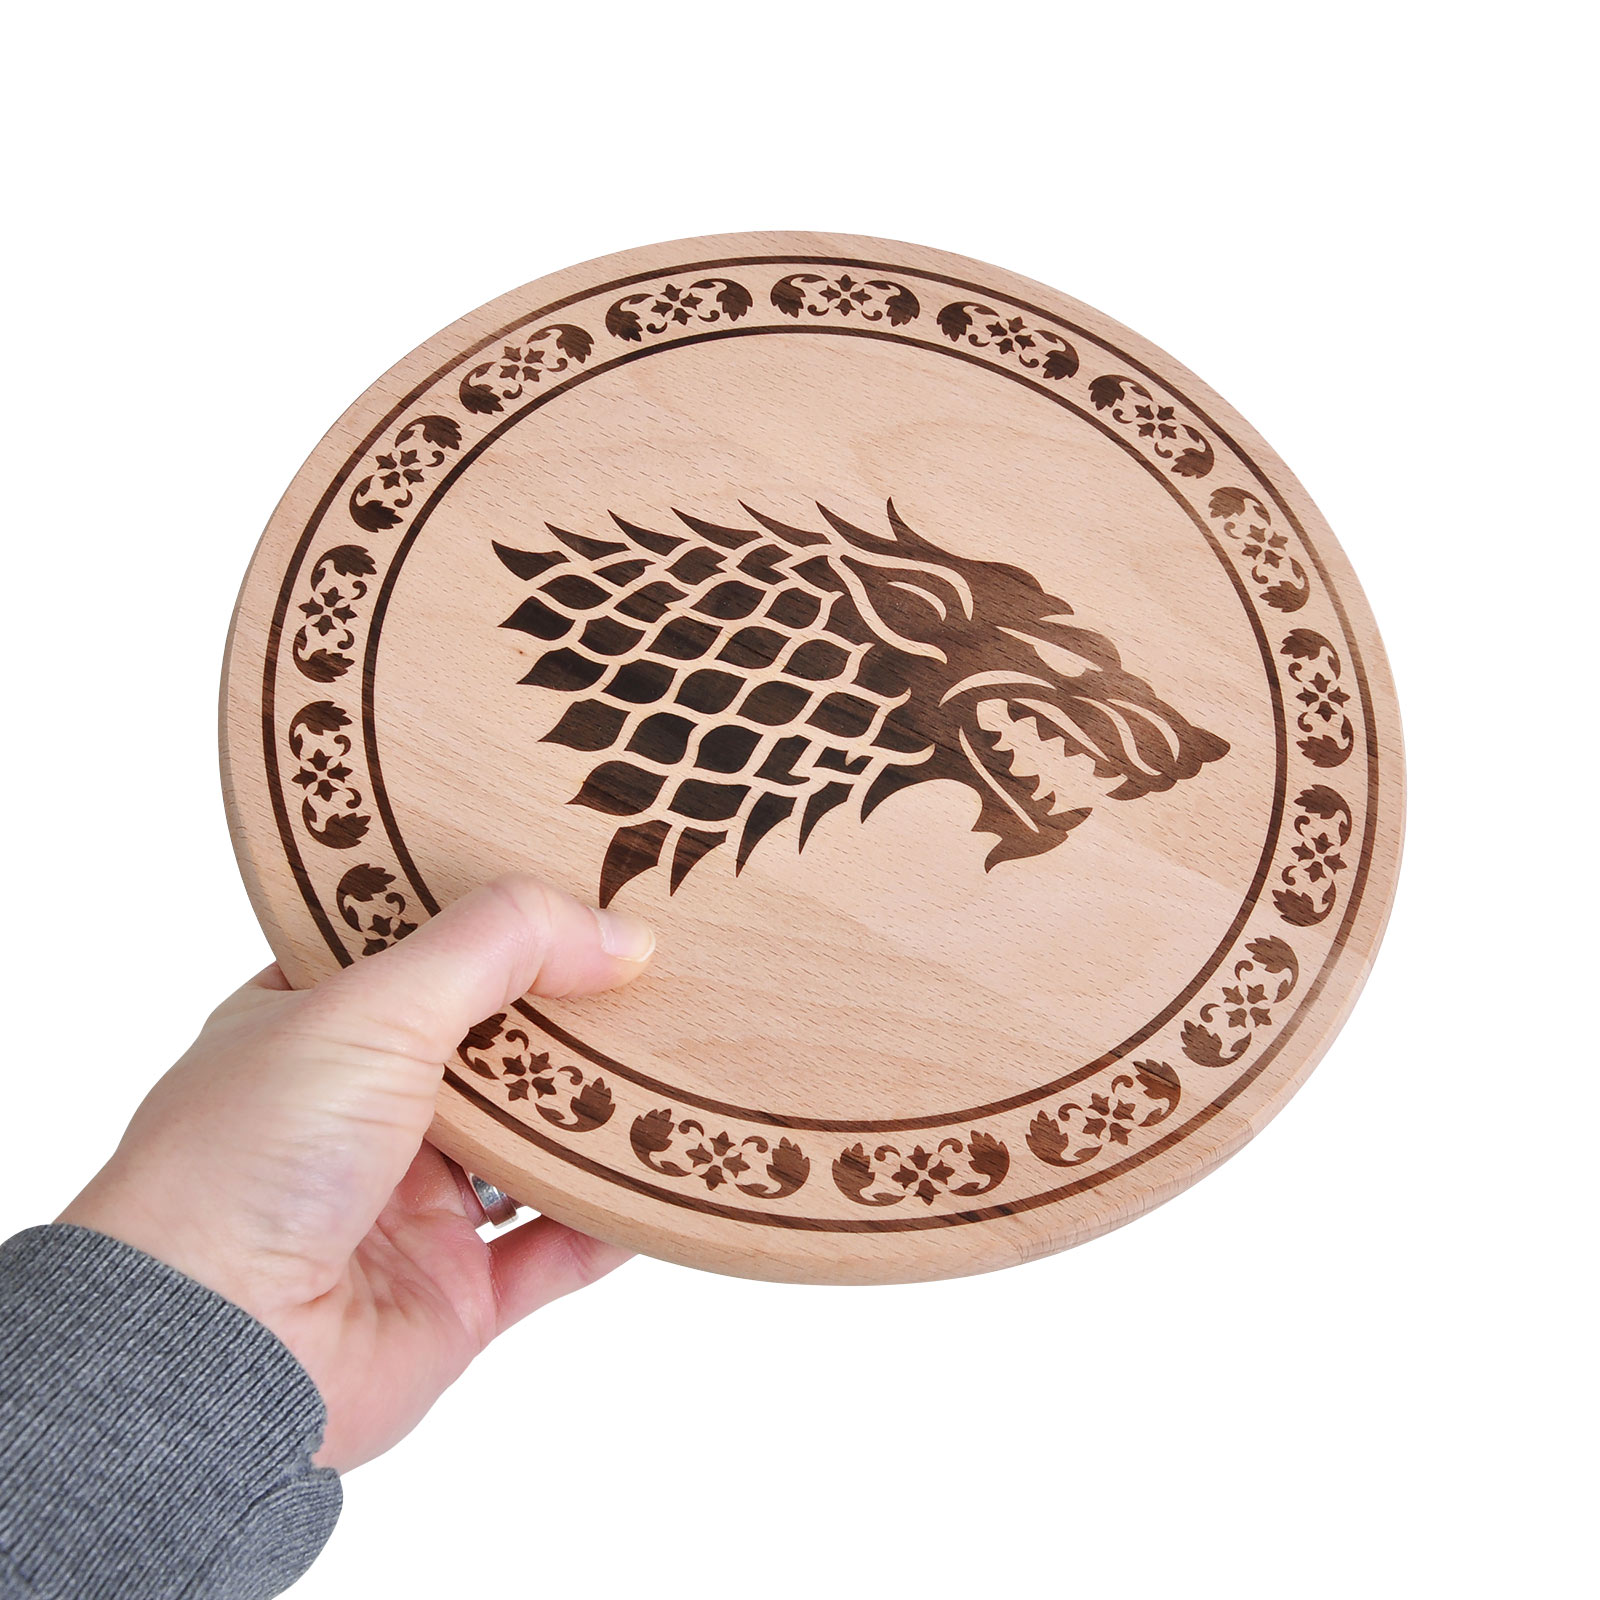 Game of Thrones - House Stark Cutting Board Beech